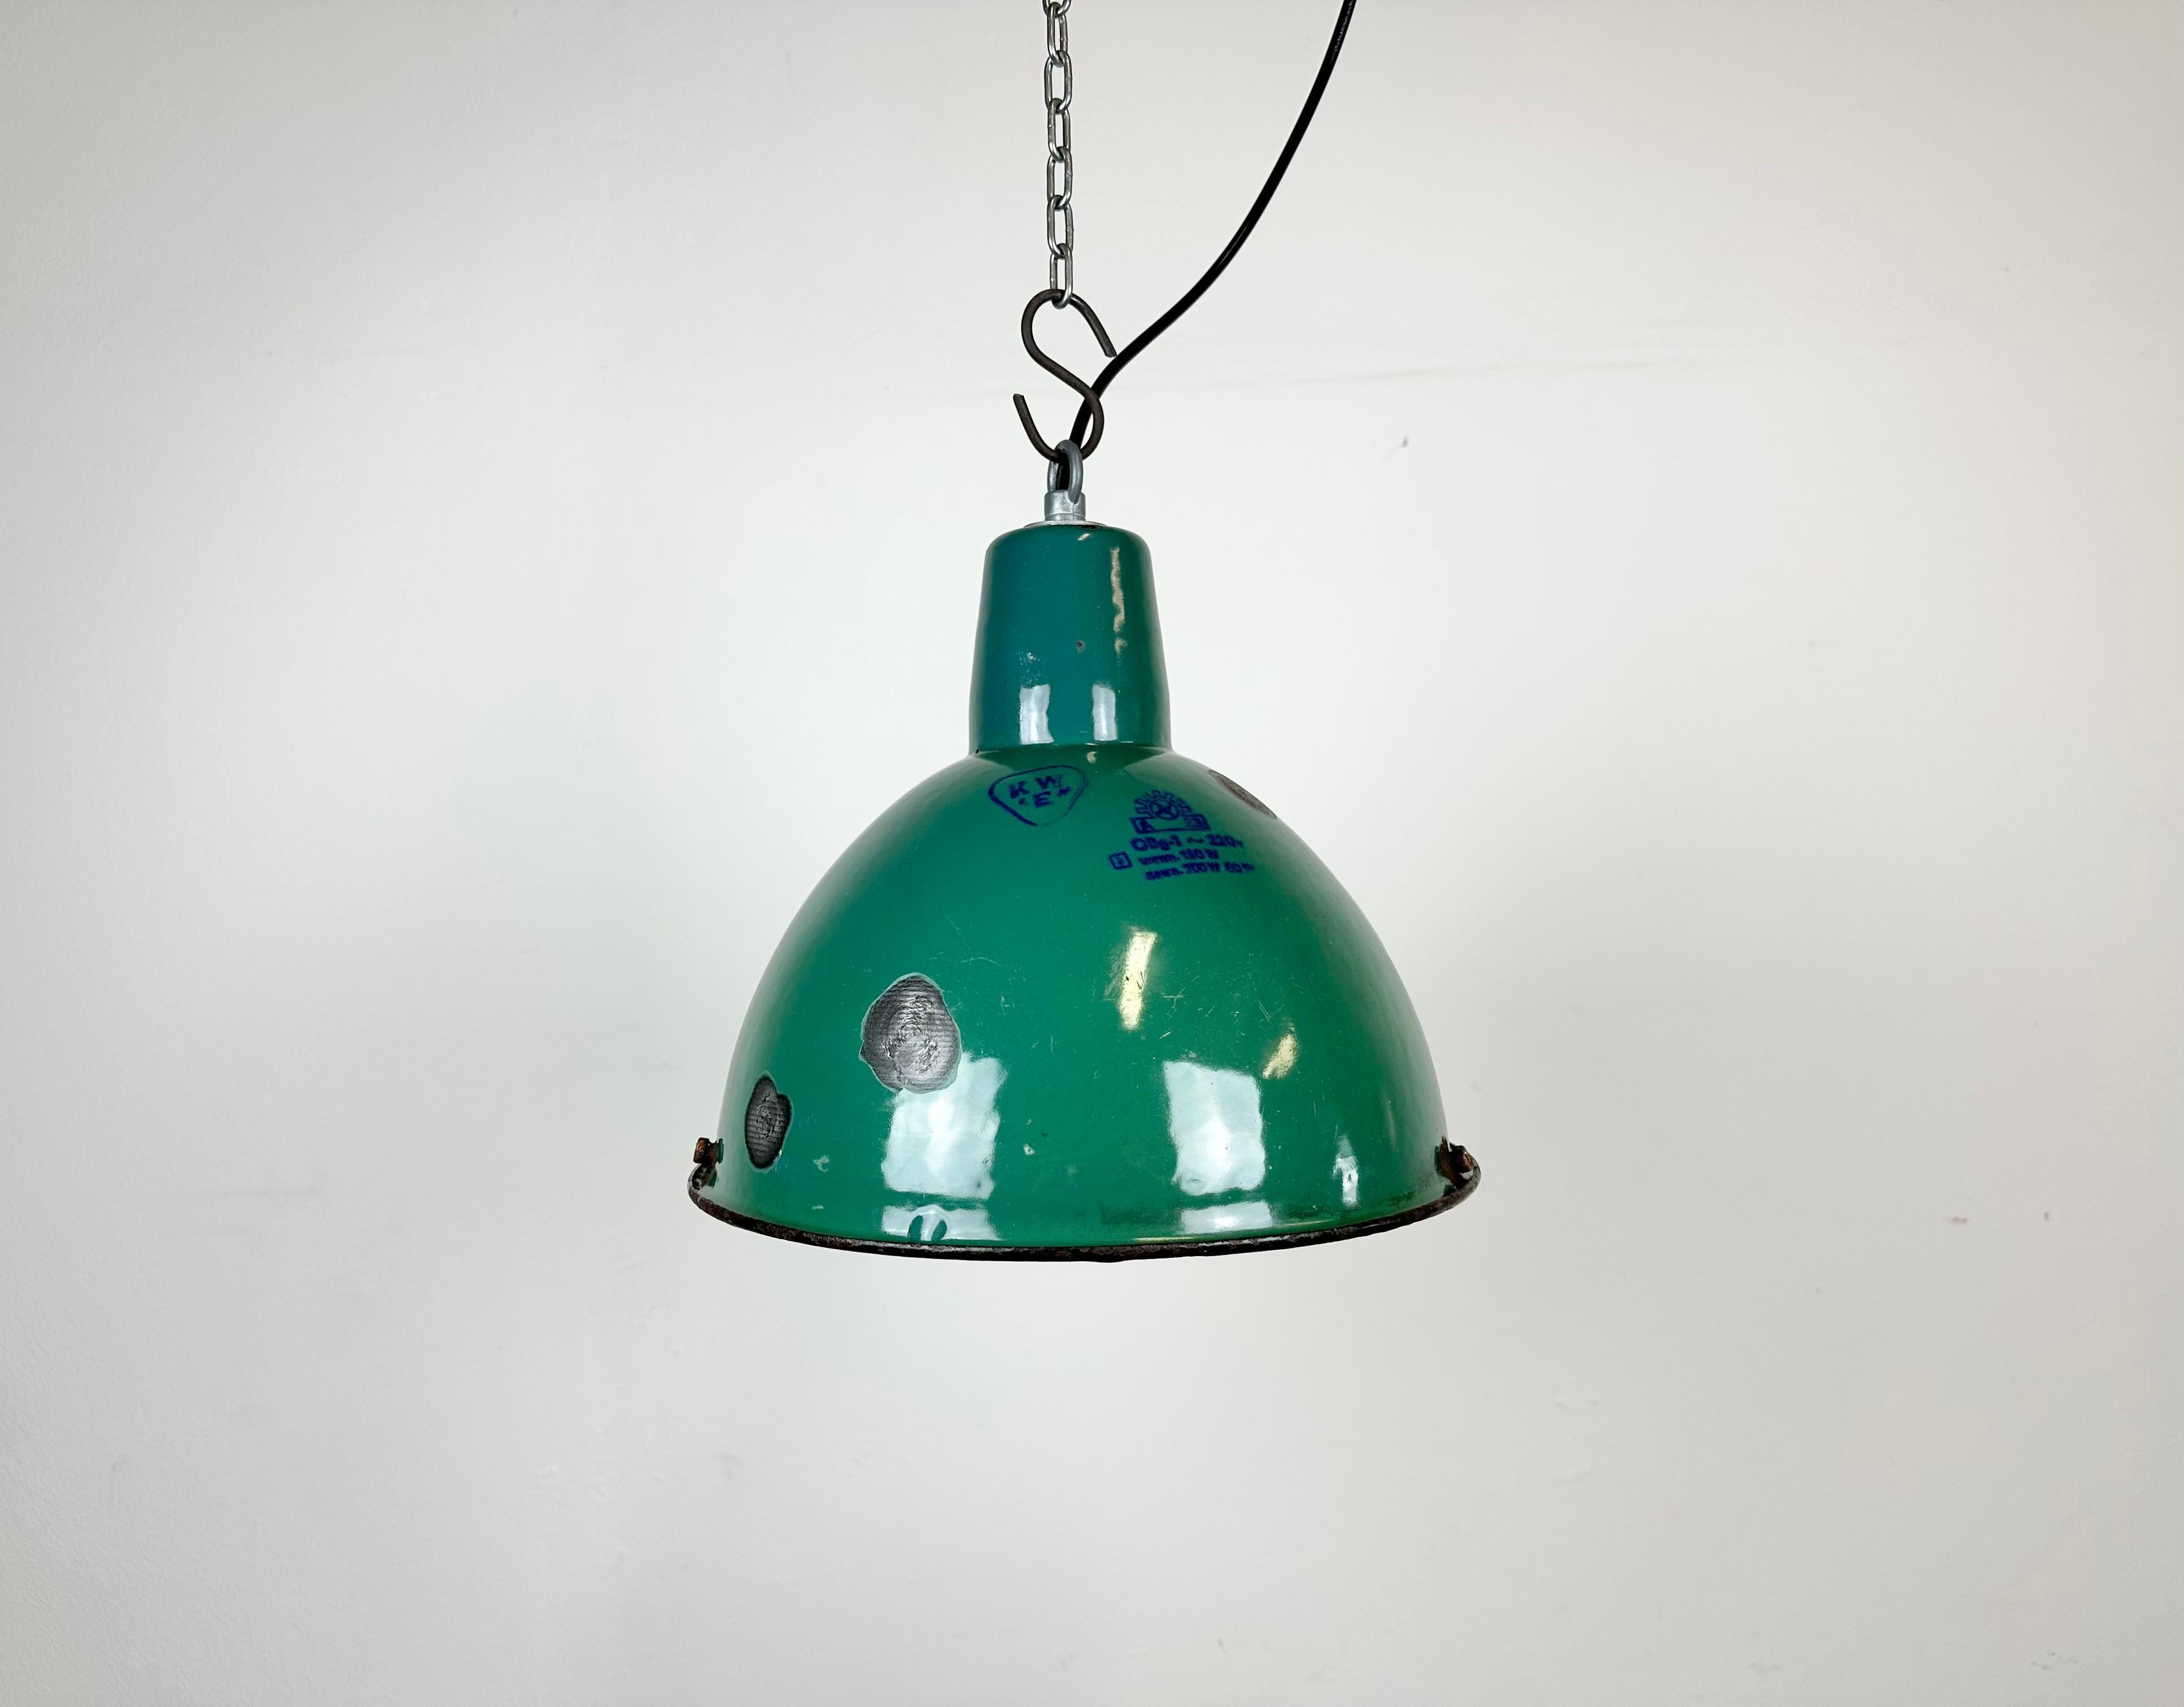 Industrial green enamel pendant light made by Polam Wilkasy in Poland during the 1960s. White enamel inside the shade. Iron top. The porcelain socket requires E 27 light bulbs. New wire. Fully functional. The weight of the lamp is 1 kg.